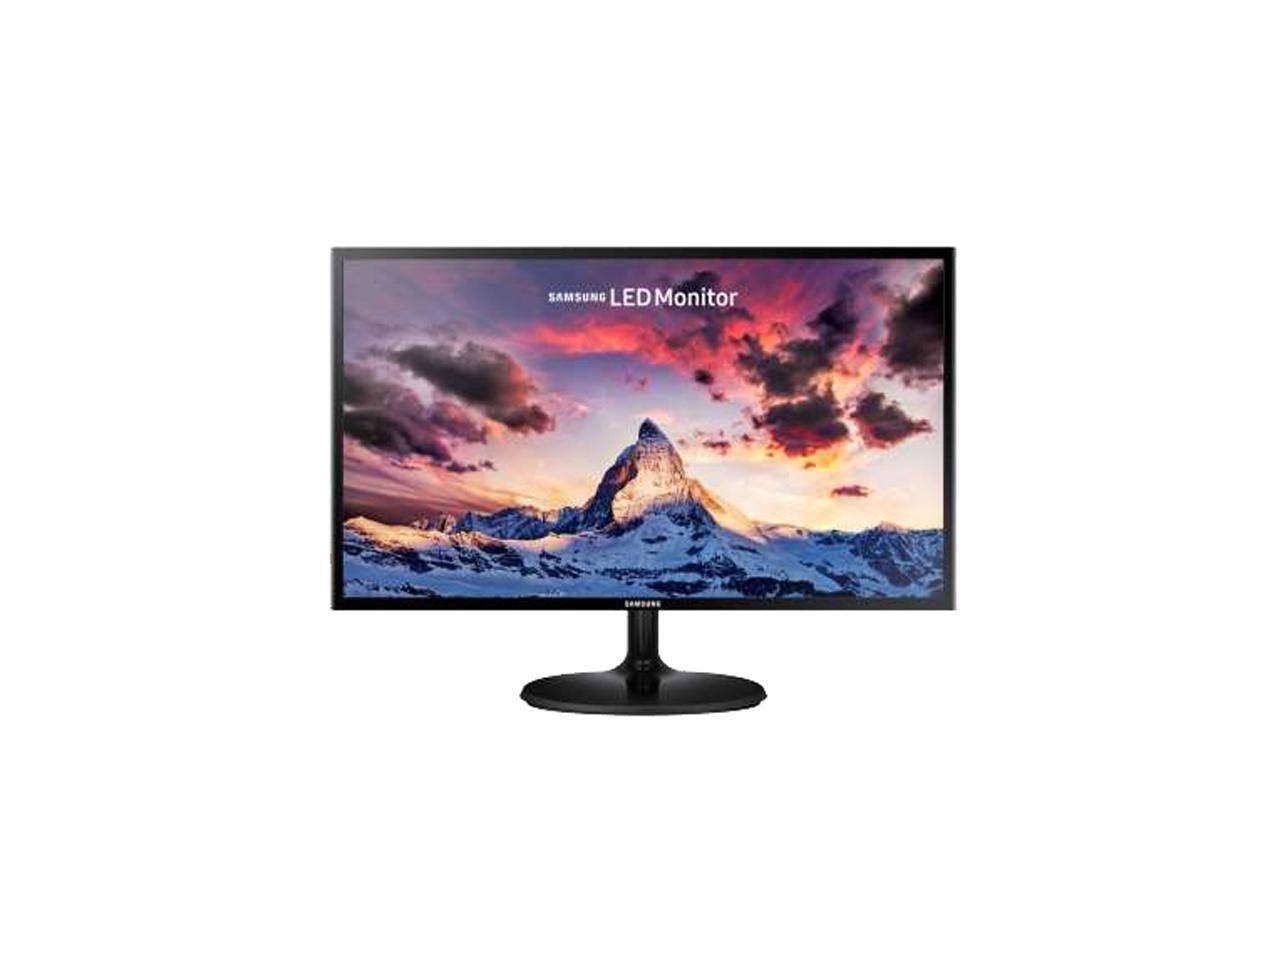 Newegg: SAMSUNG S24F354 [24" Full HD 1920 x 1080 LED Backlit Monitor for $99.99 after Promo Code + FS